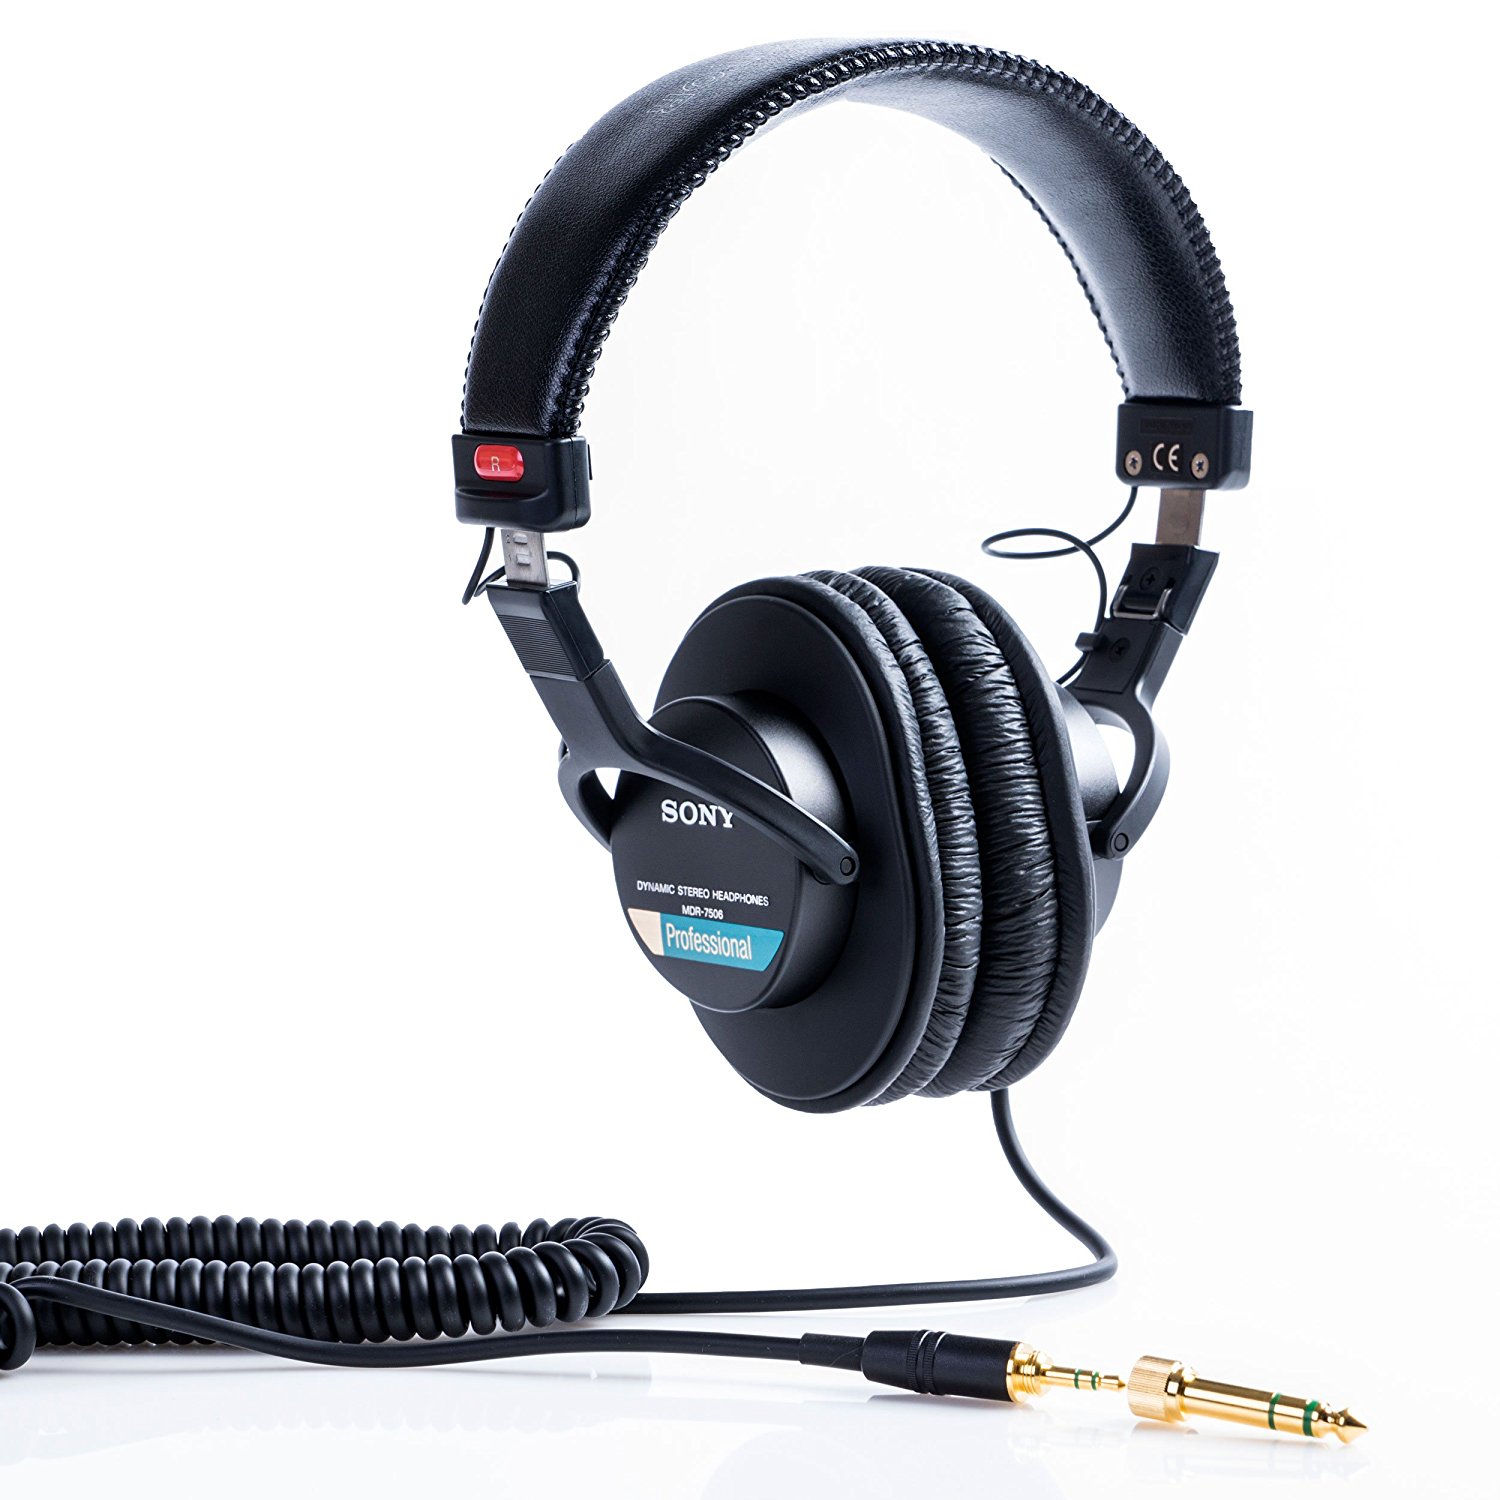 Sony MDR 7506 headphones against a white background.